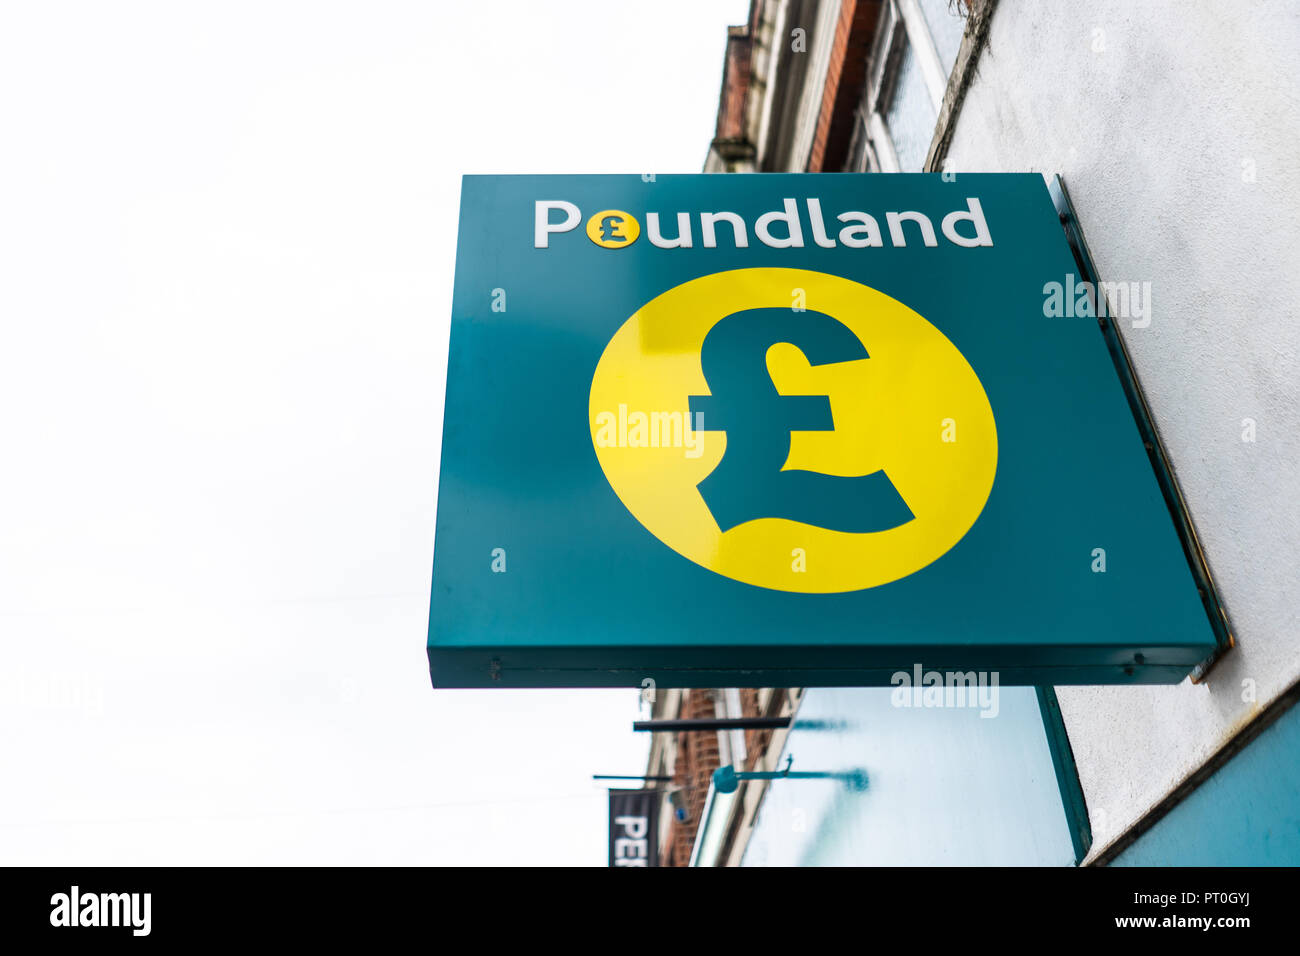 Poundland sign in the highstreet, St Ives, Penzance, Cornwall - England Stock Photo